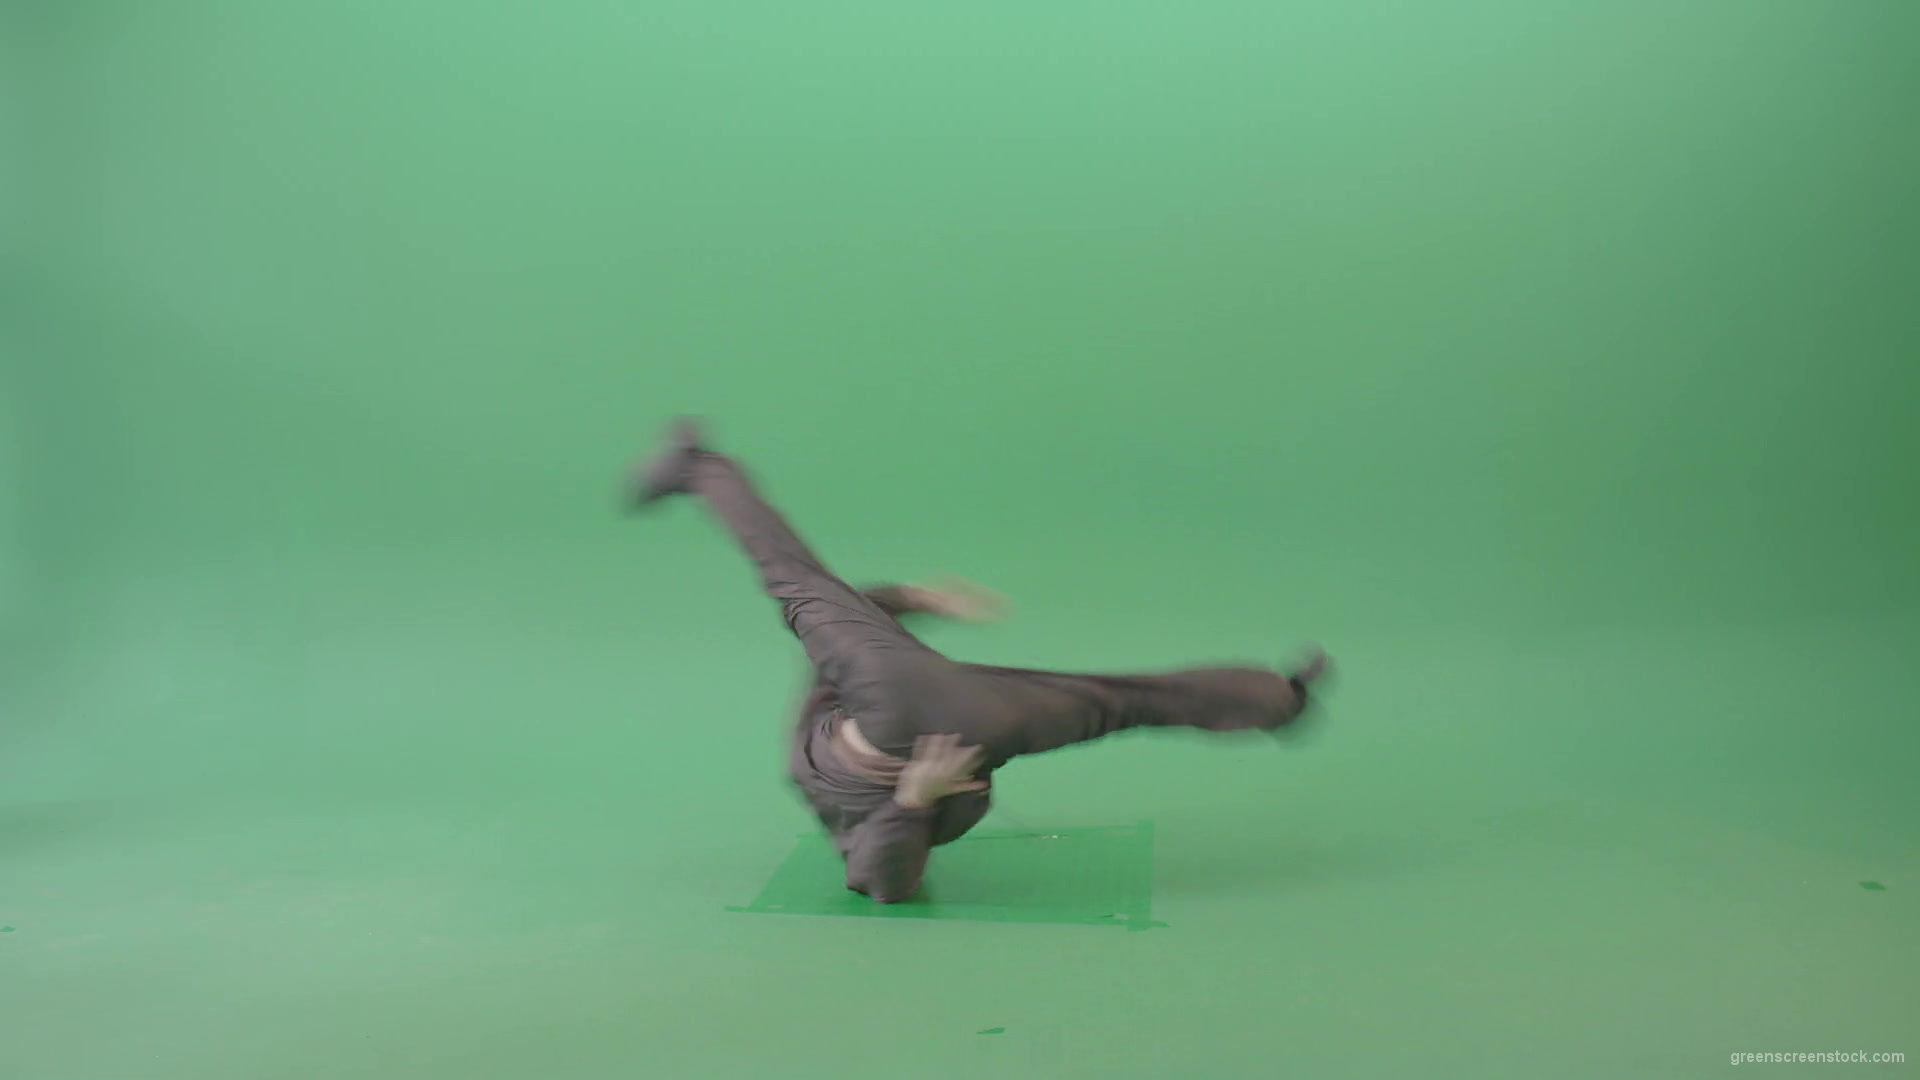 Hip-Hop-Dance-making-power-move-with-freeze-dancing-breakdance-on-green-screen-4K-Video-Footage-1920_005 Green Screen Stock